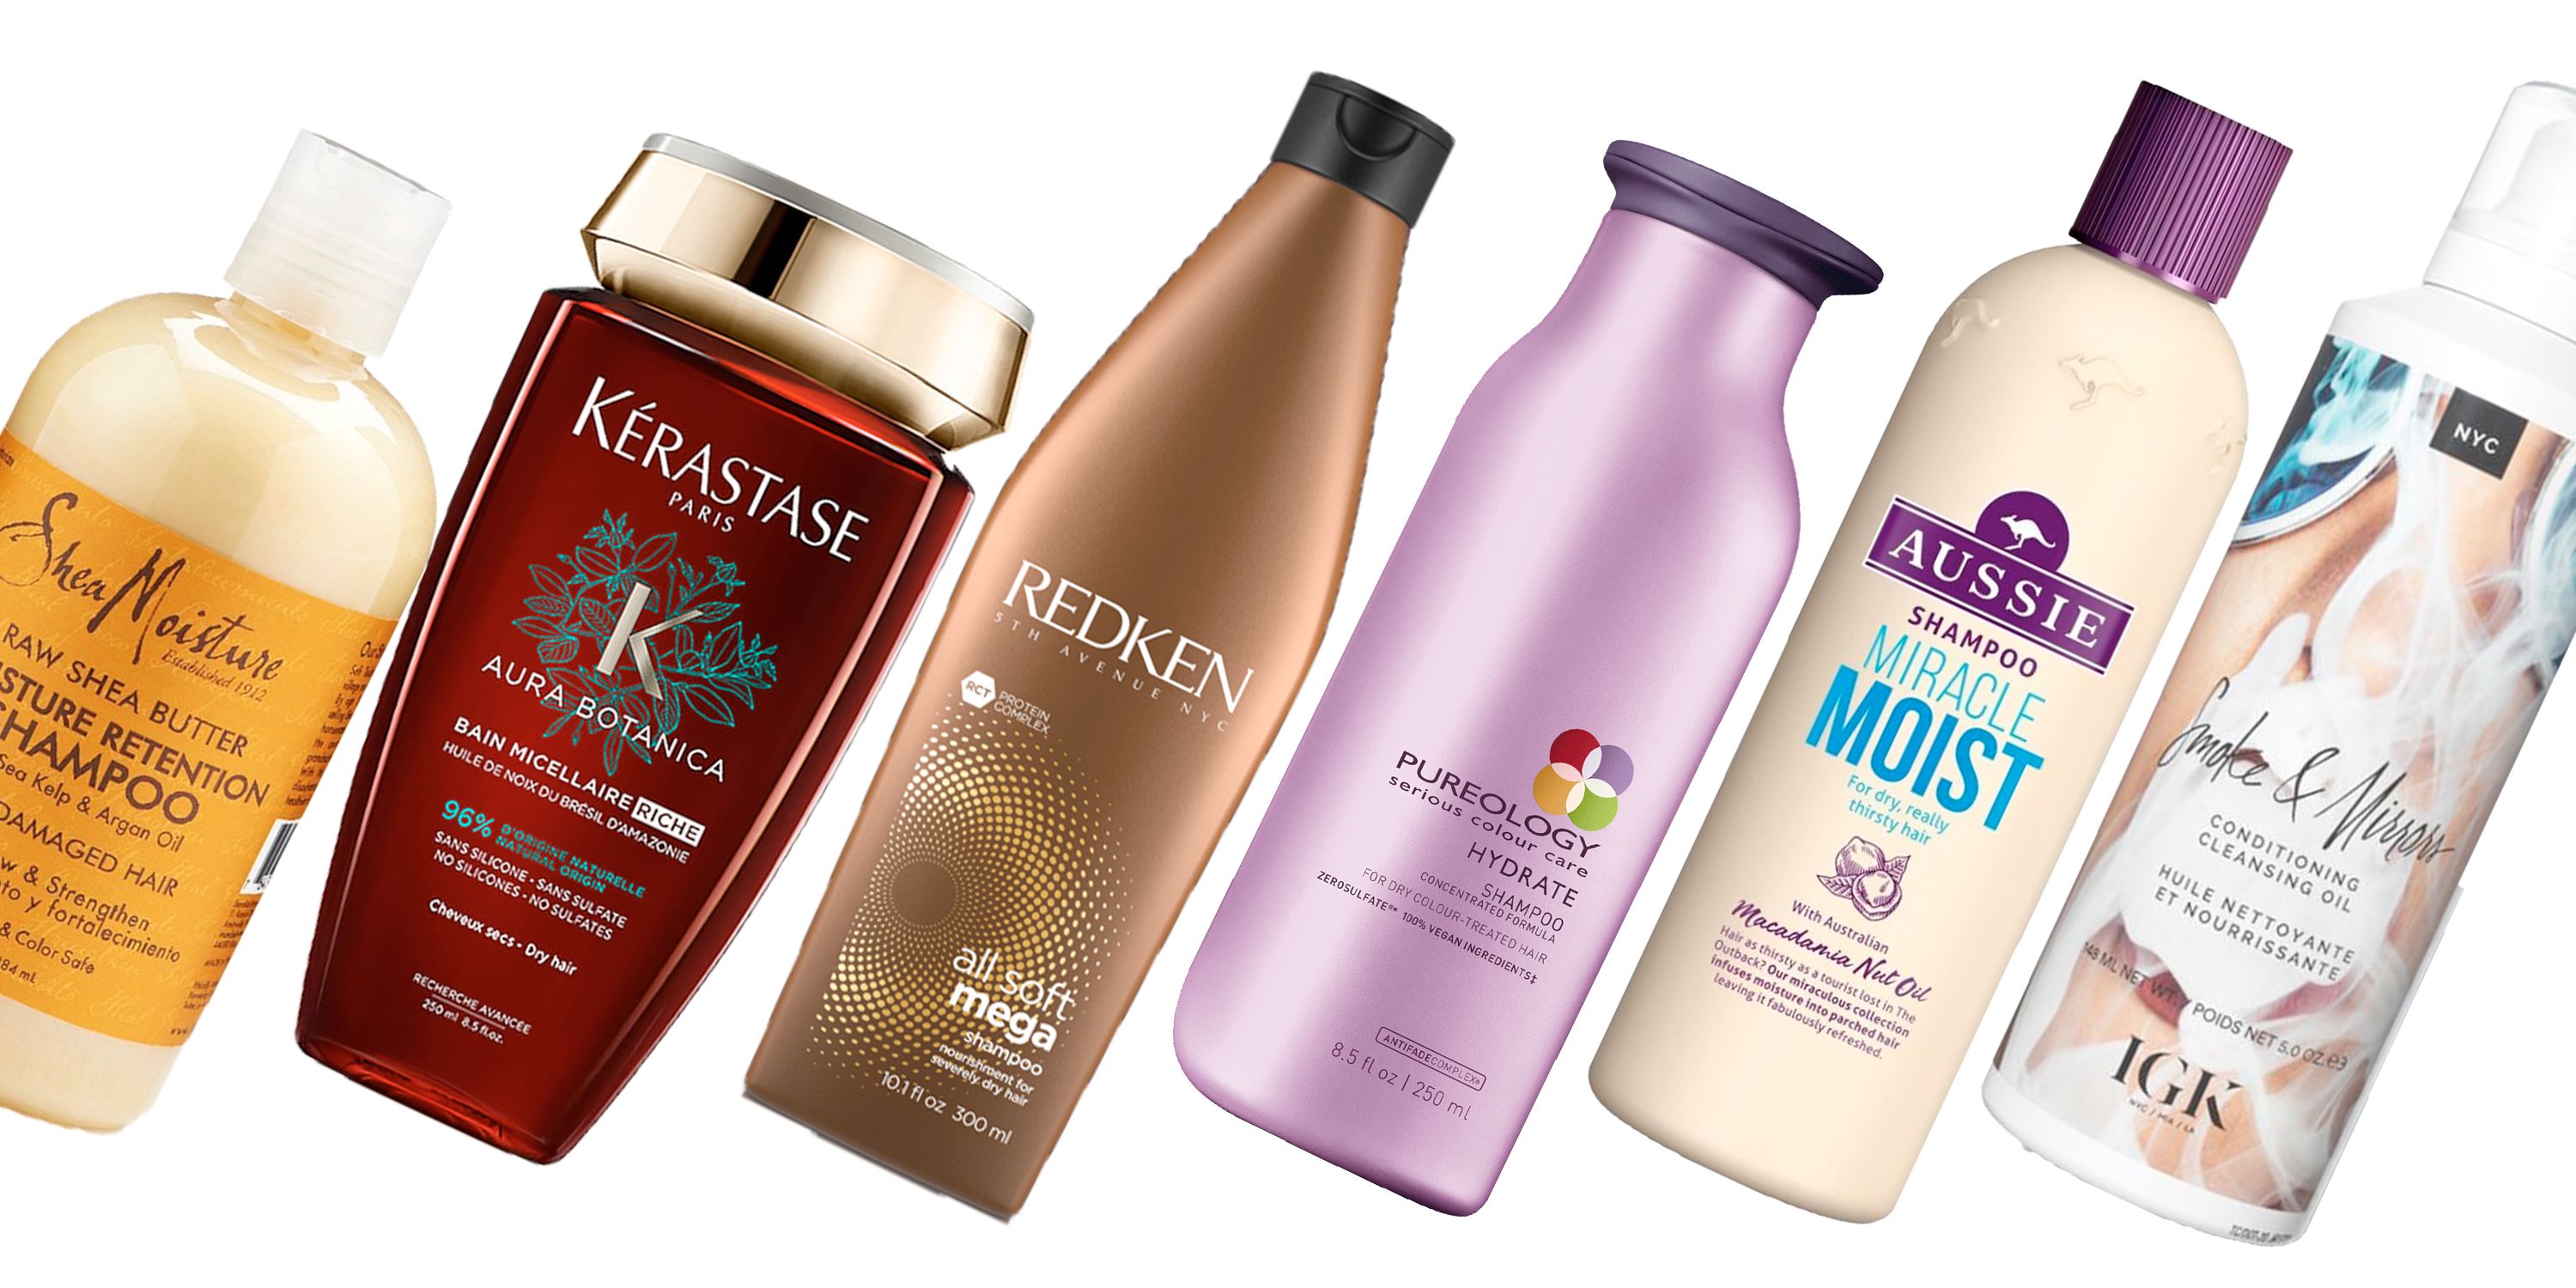 Best Shampoo For Dry Hair 2018 9 Reviewed By Cosmos Beauty Editor